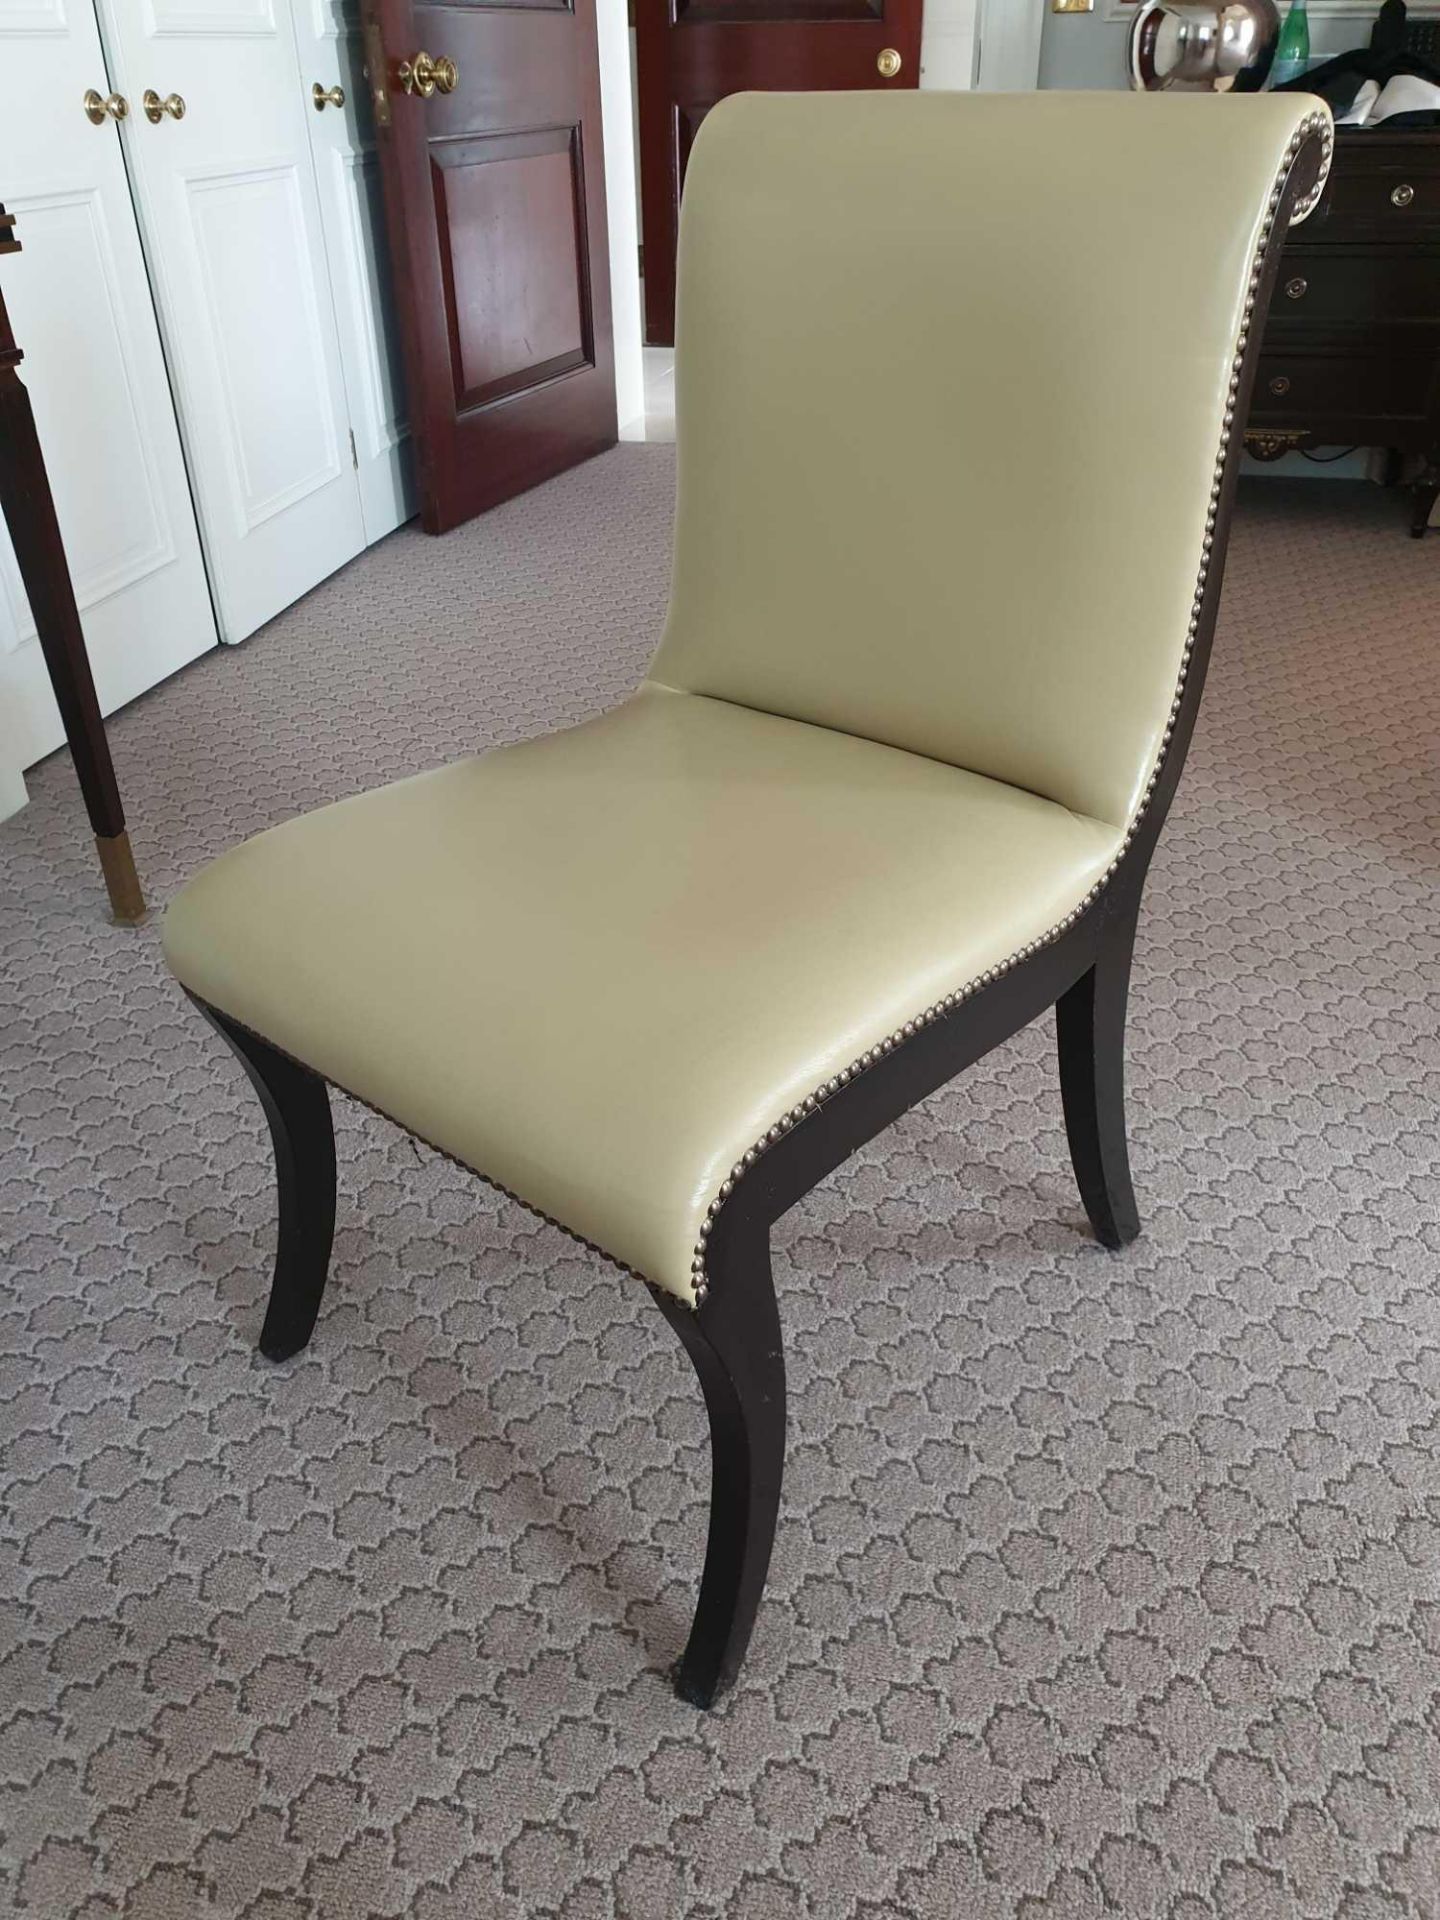 Sroll Back Leather Side Chair Legs And Frame In Solid Oak With A Stained Finish Upholstered In